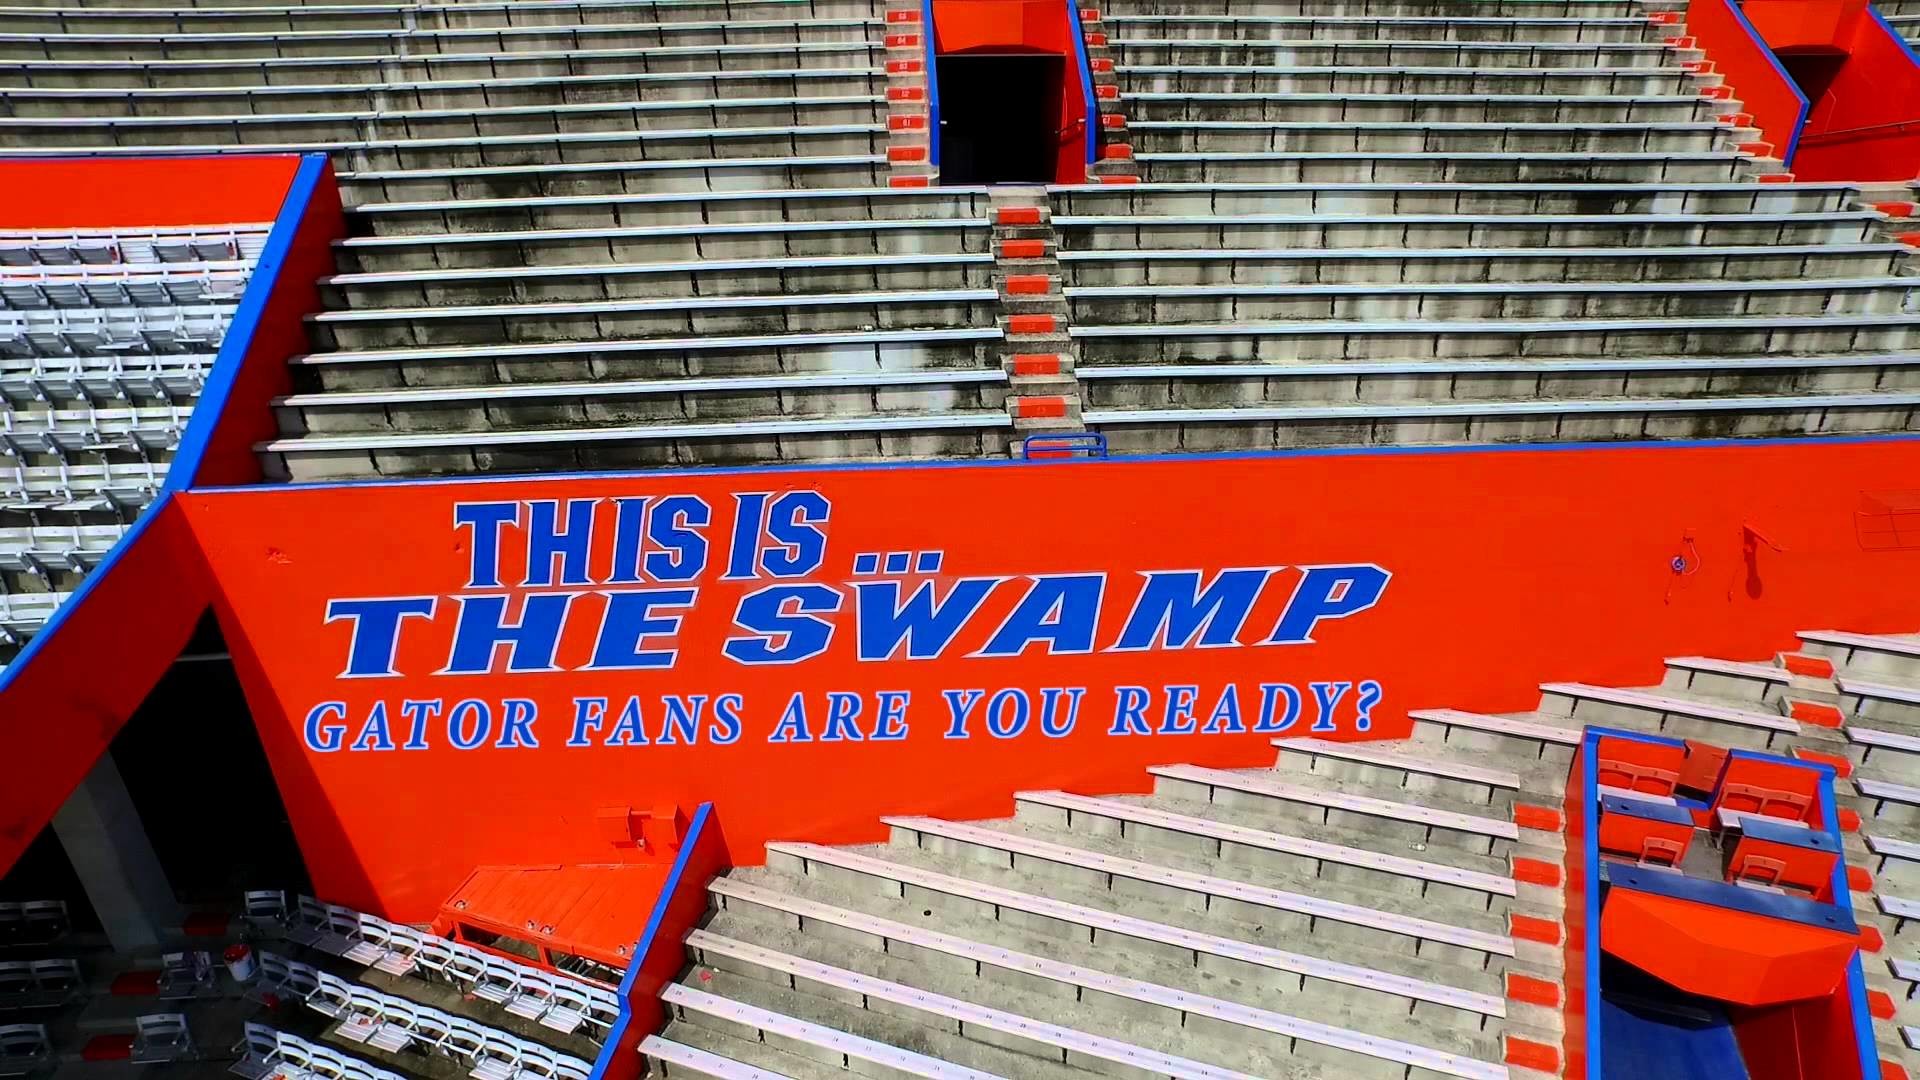 This Is The Swamp – University of Florida Gator Football Time